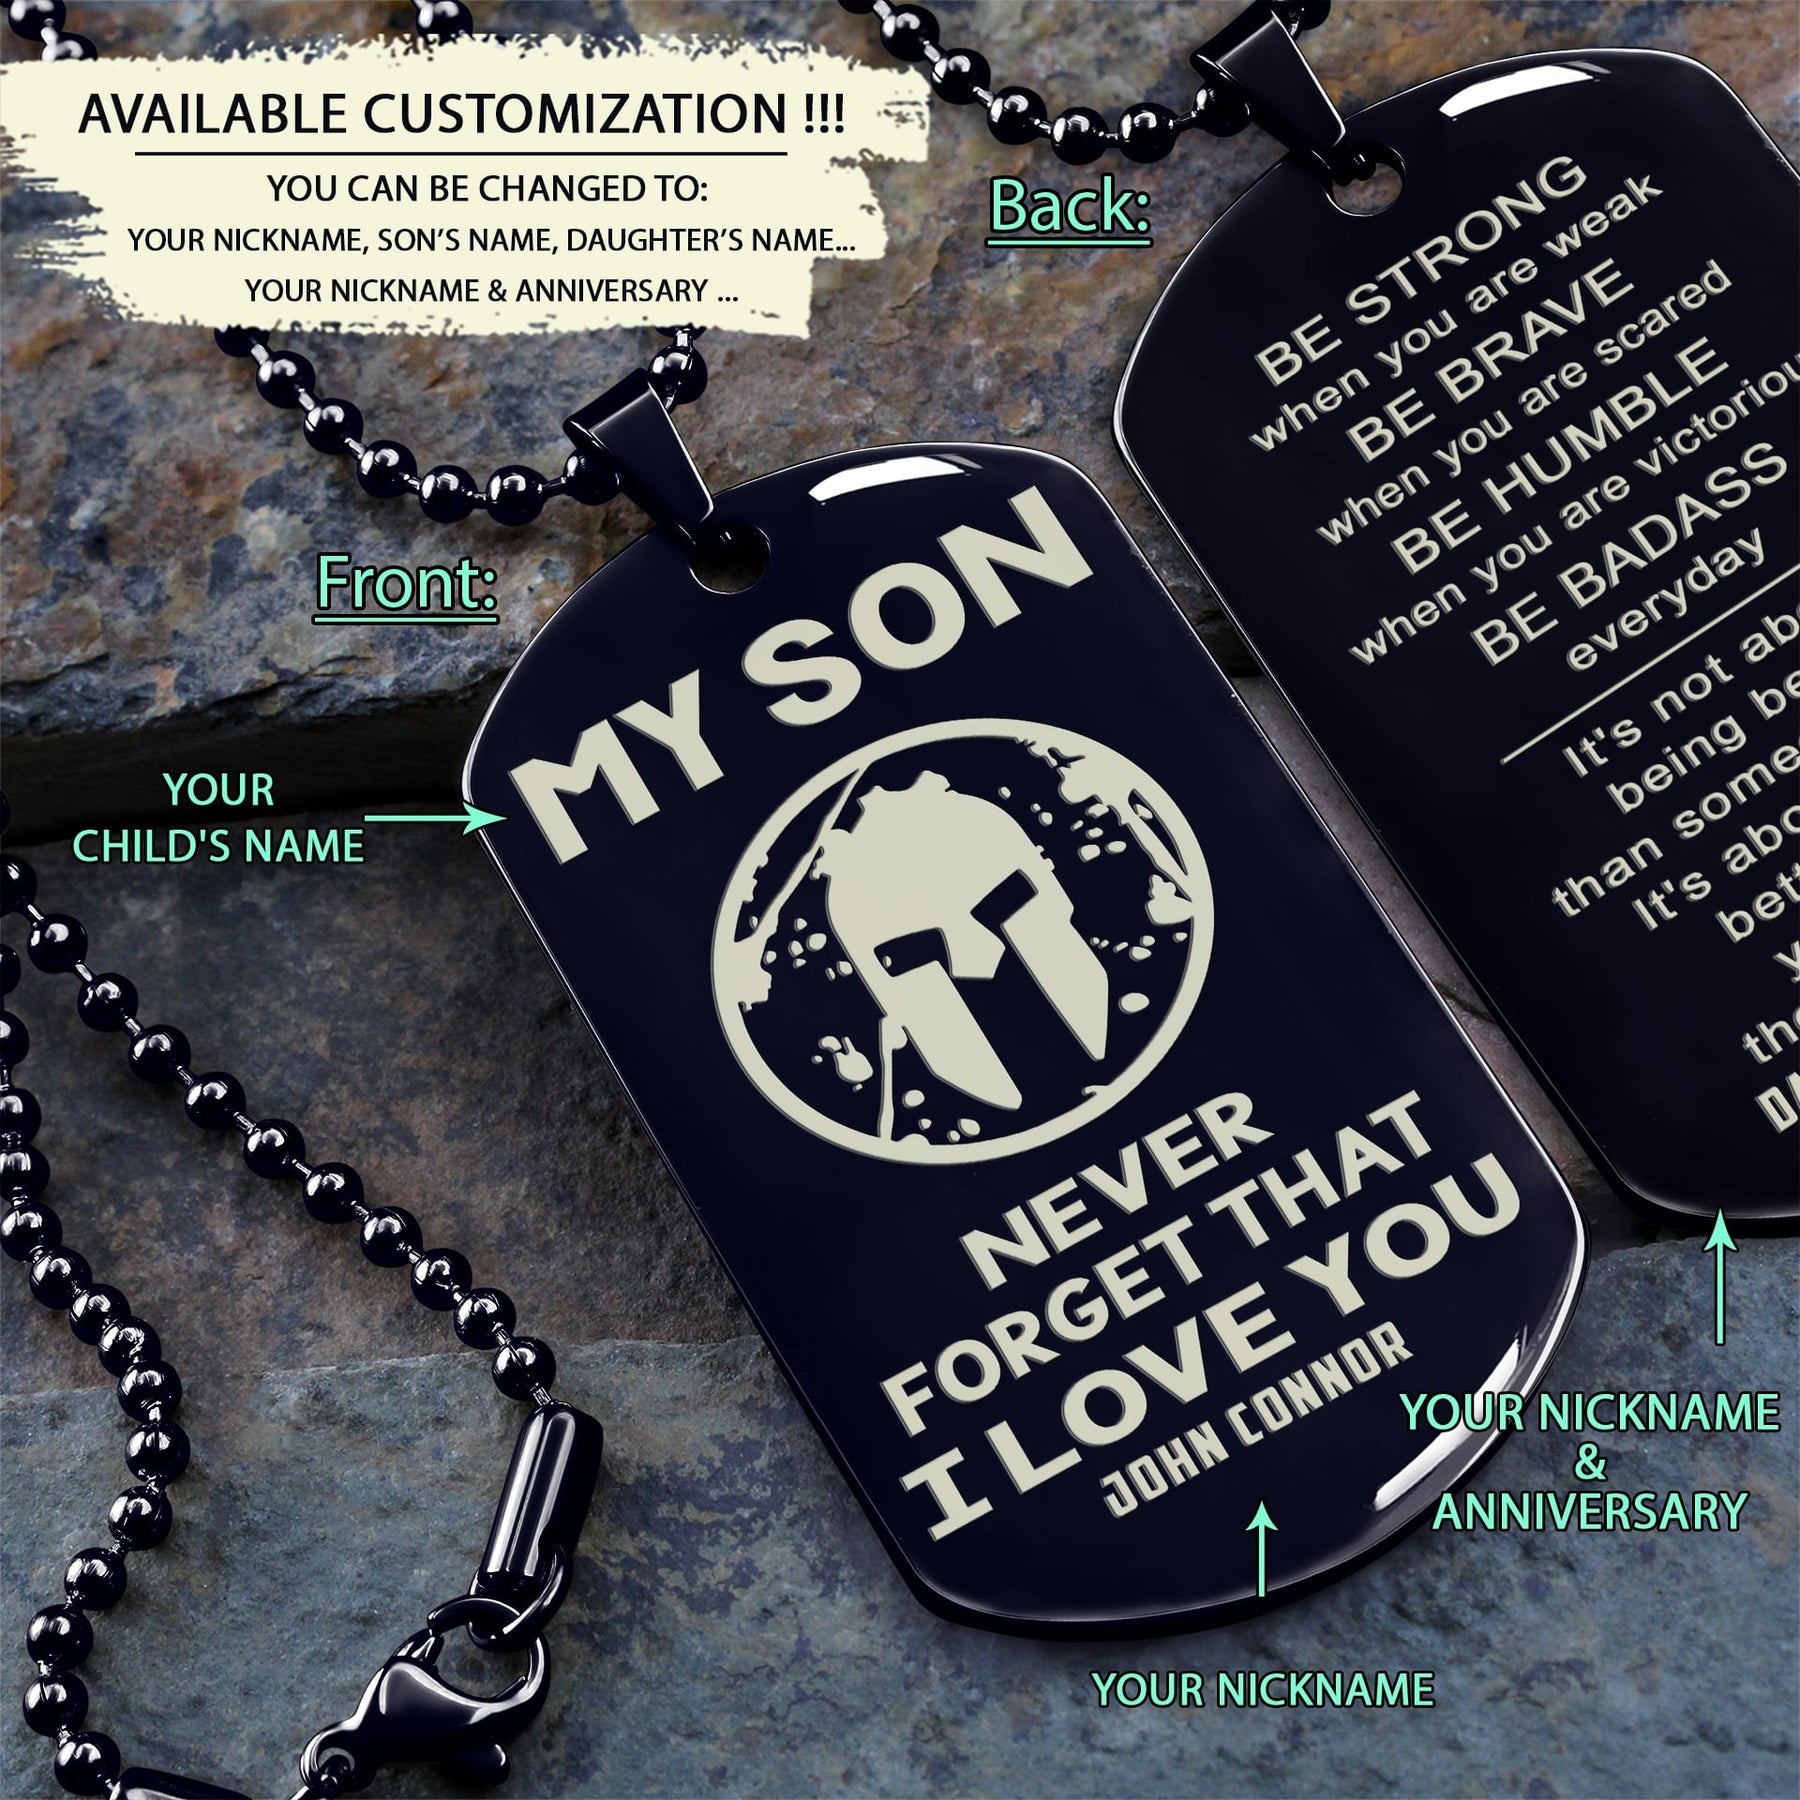 WAD048 - To My Son - It's Not About Being Better Than Someone Else - It's About Being Better Than You Were The Day Before - It's About Being Better Than You Were The Day Before - Warrior Dog Tag - Engrave Double Black Dog Tag